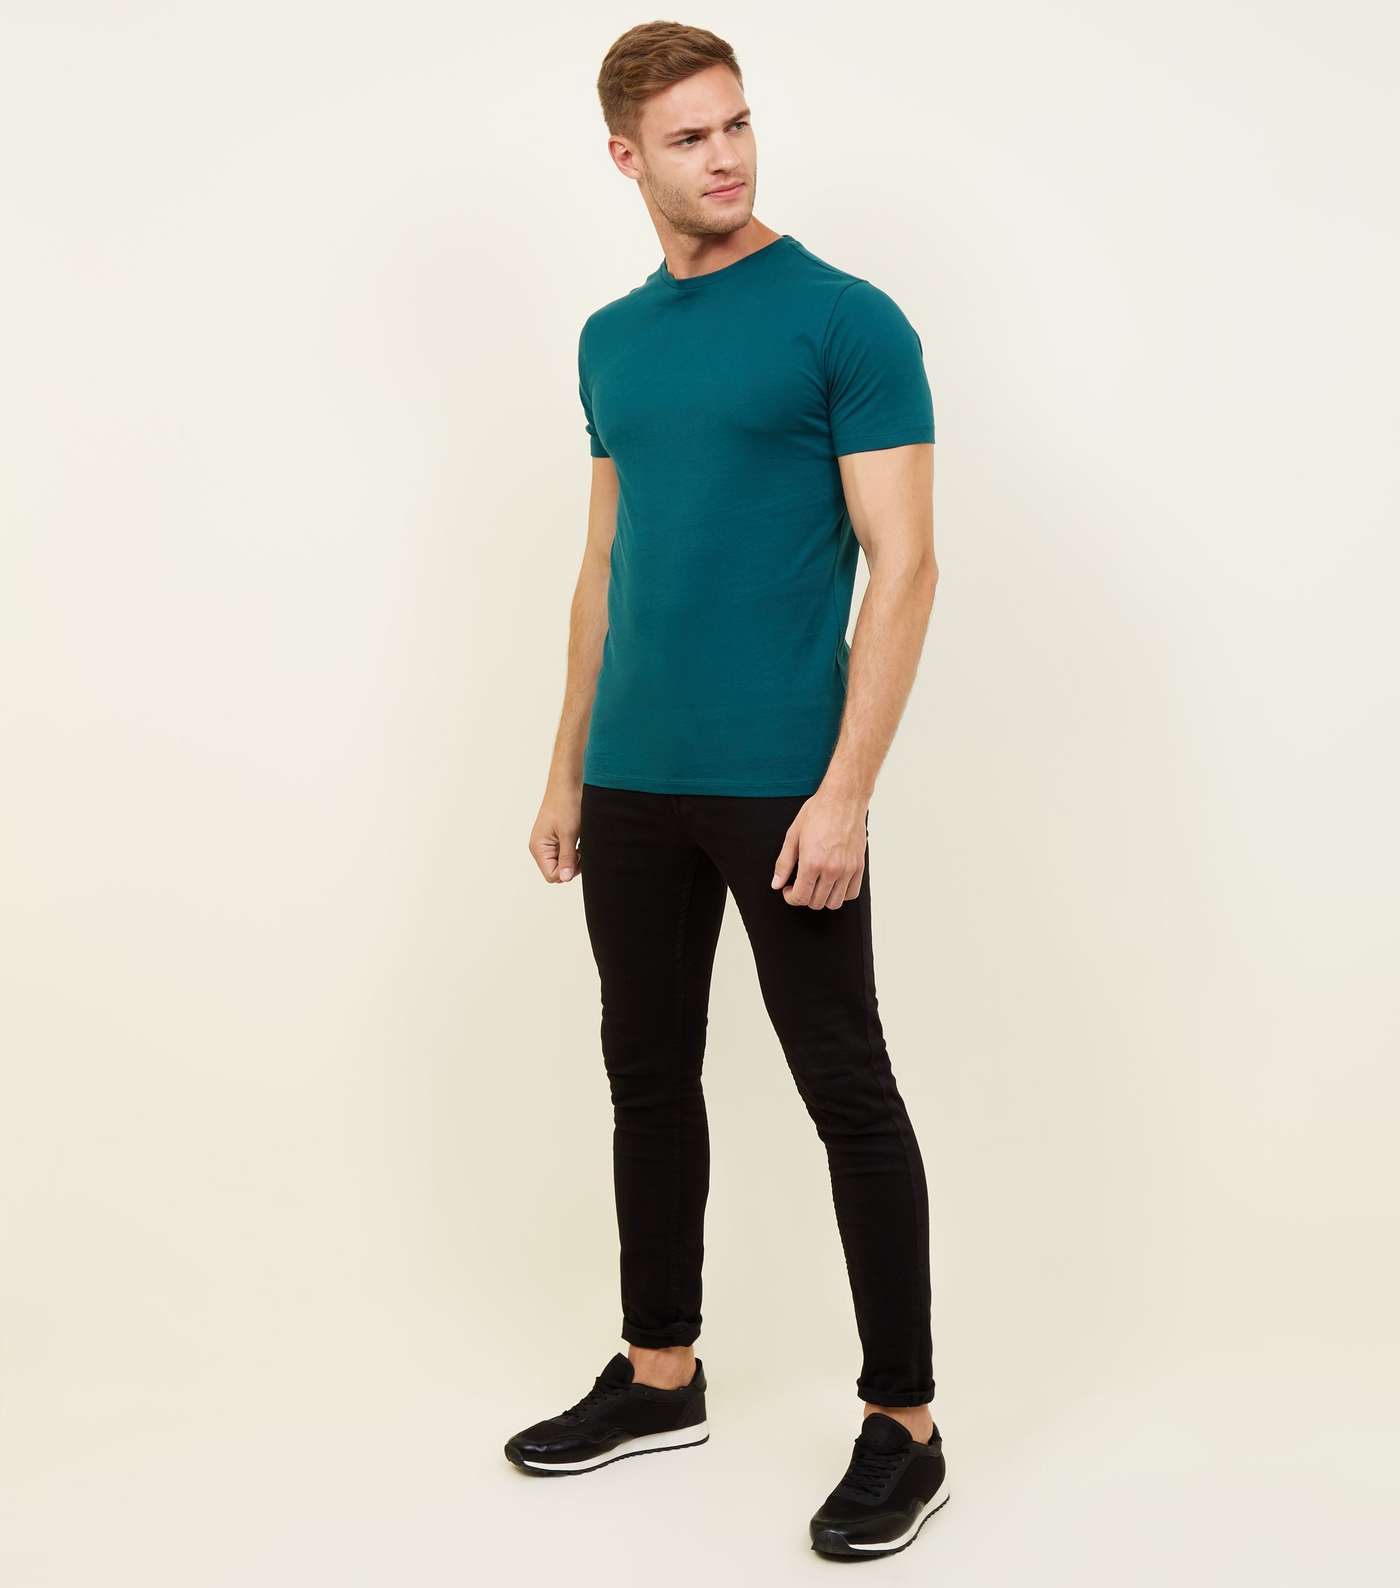 Teal Muscle Fit T-Shirt Image 2